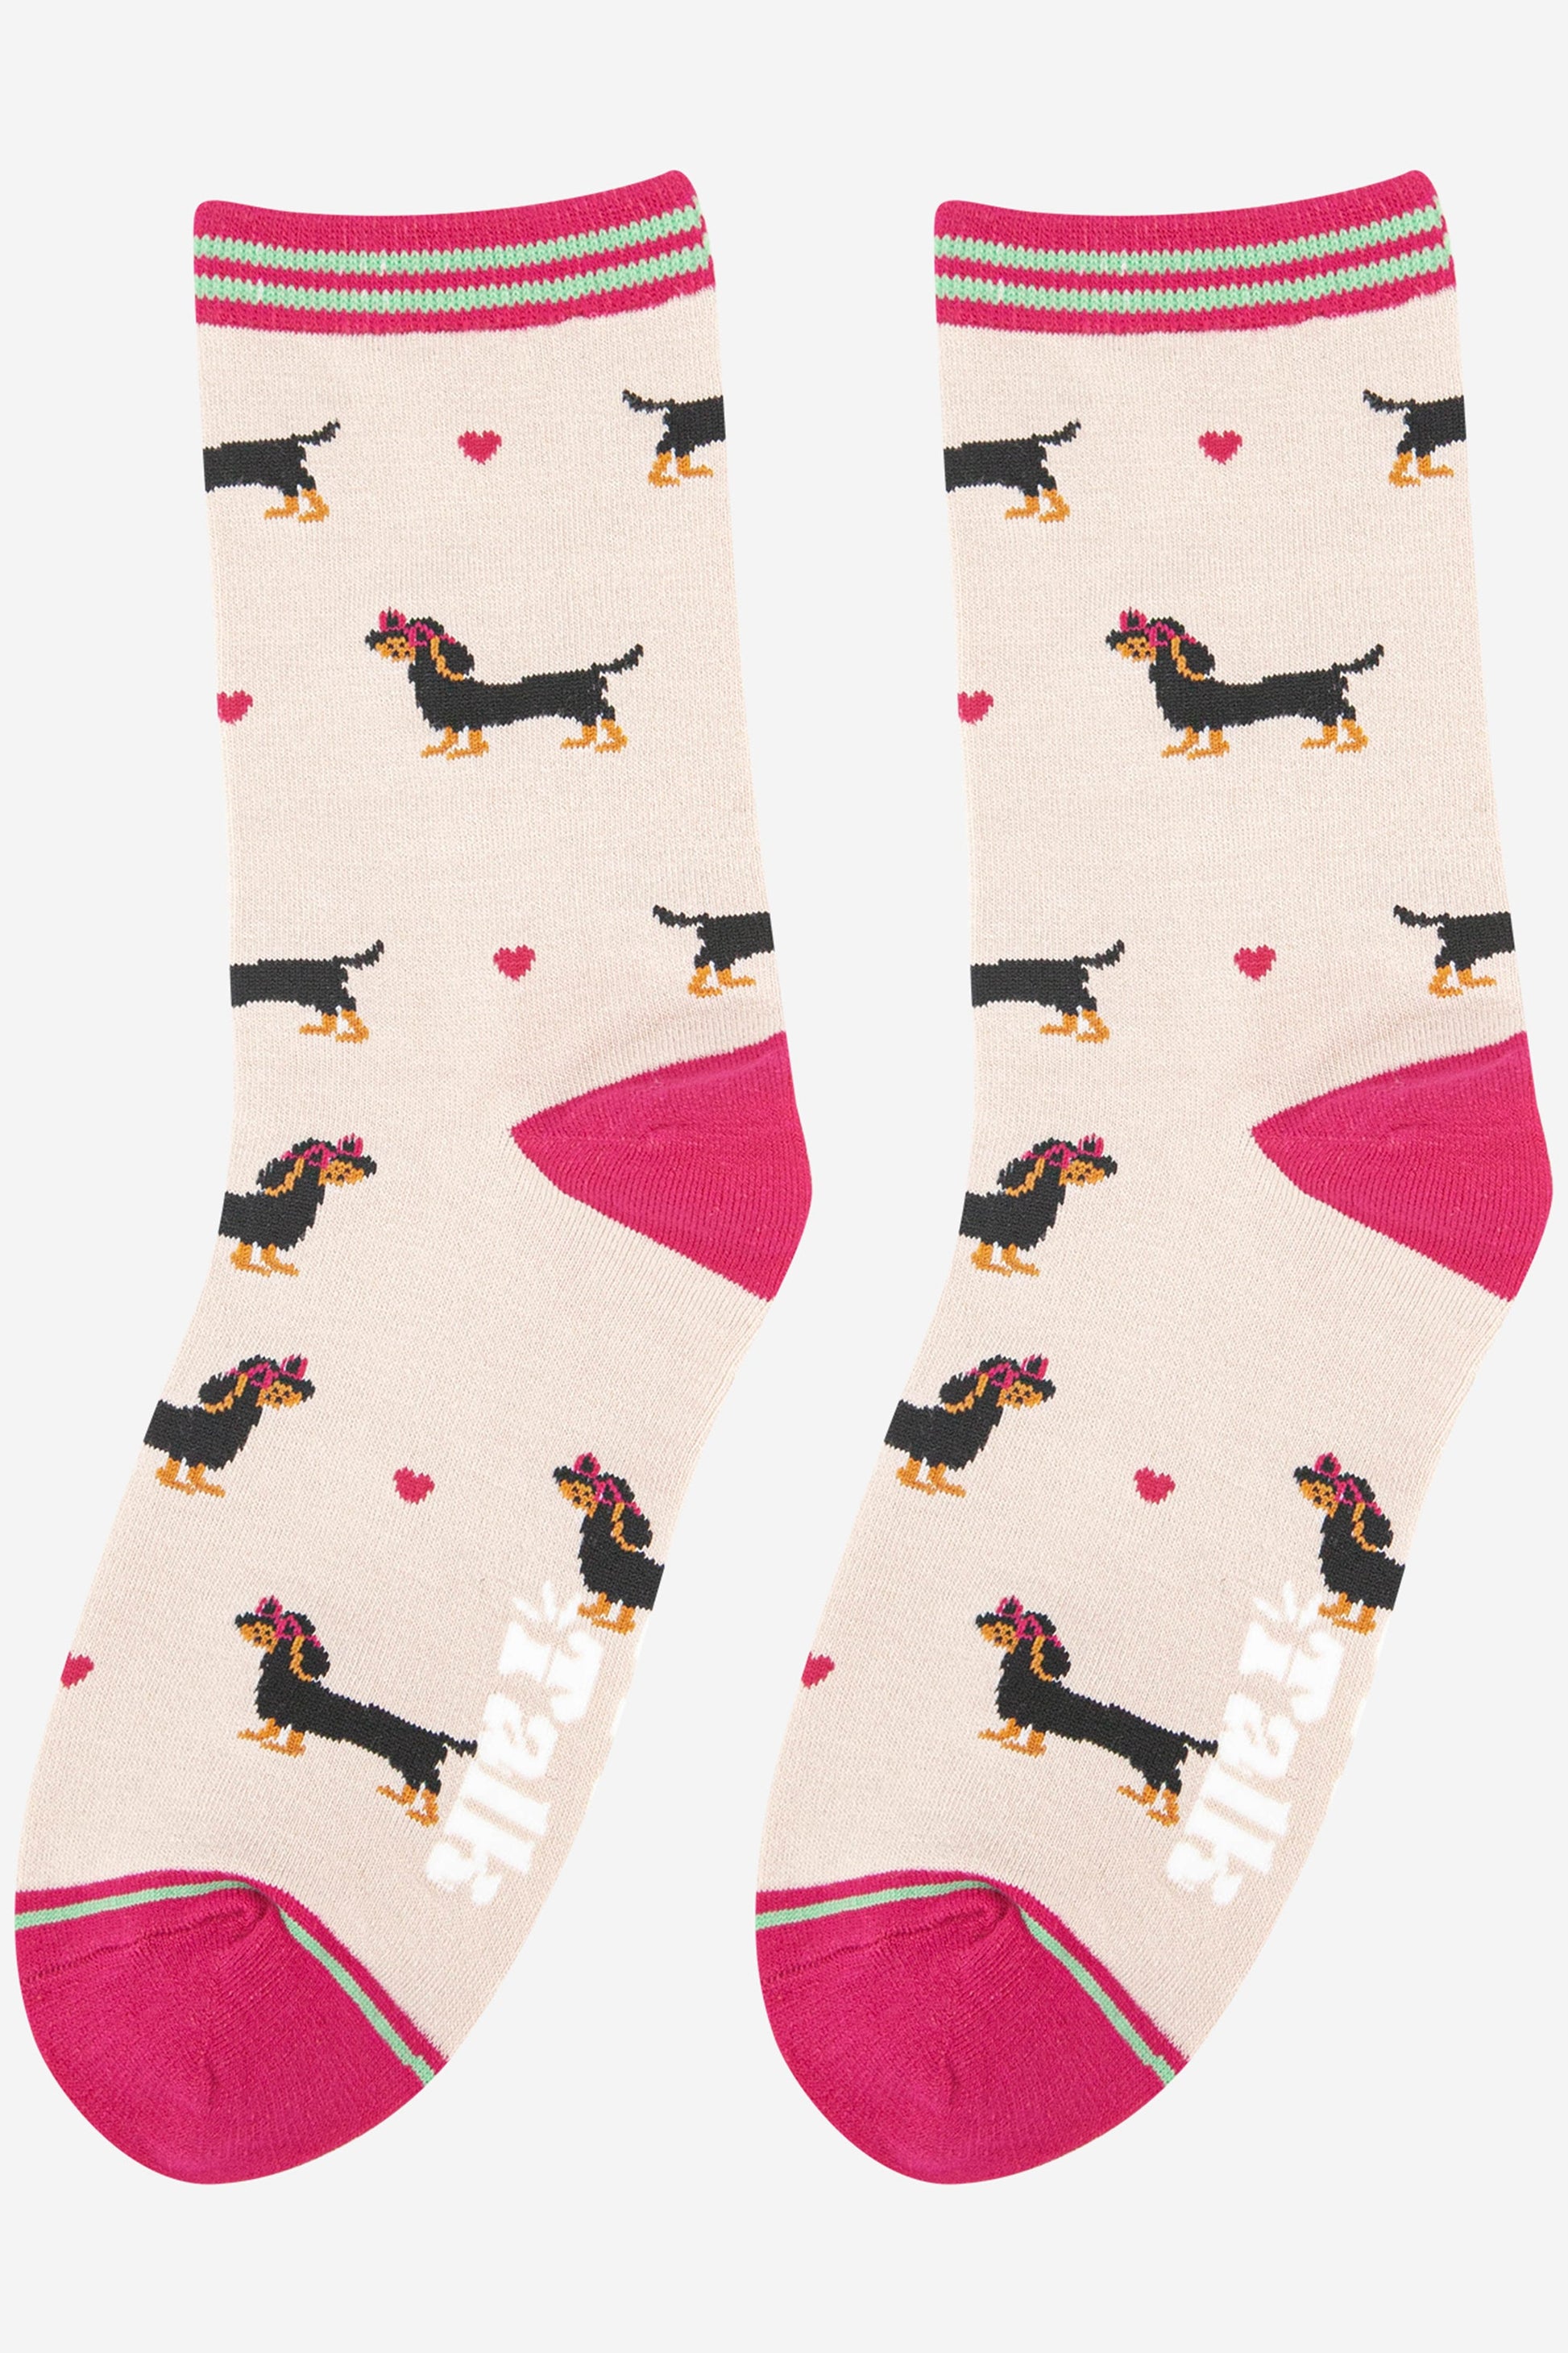 womens bamboo dog socks with weiner dogs wearing sunglasses 